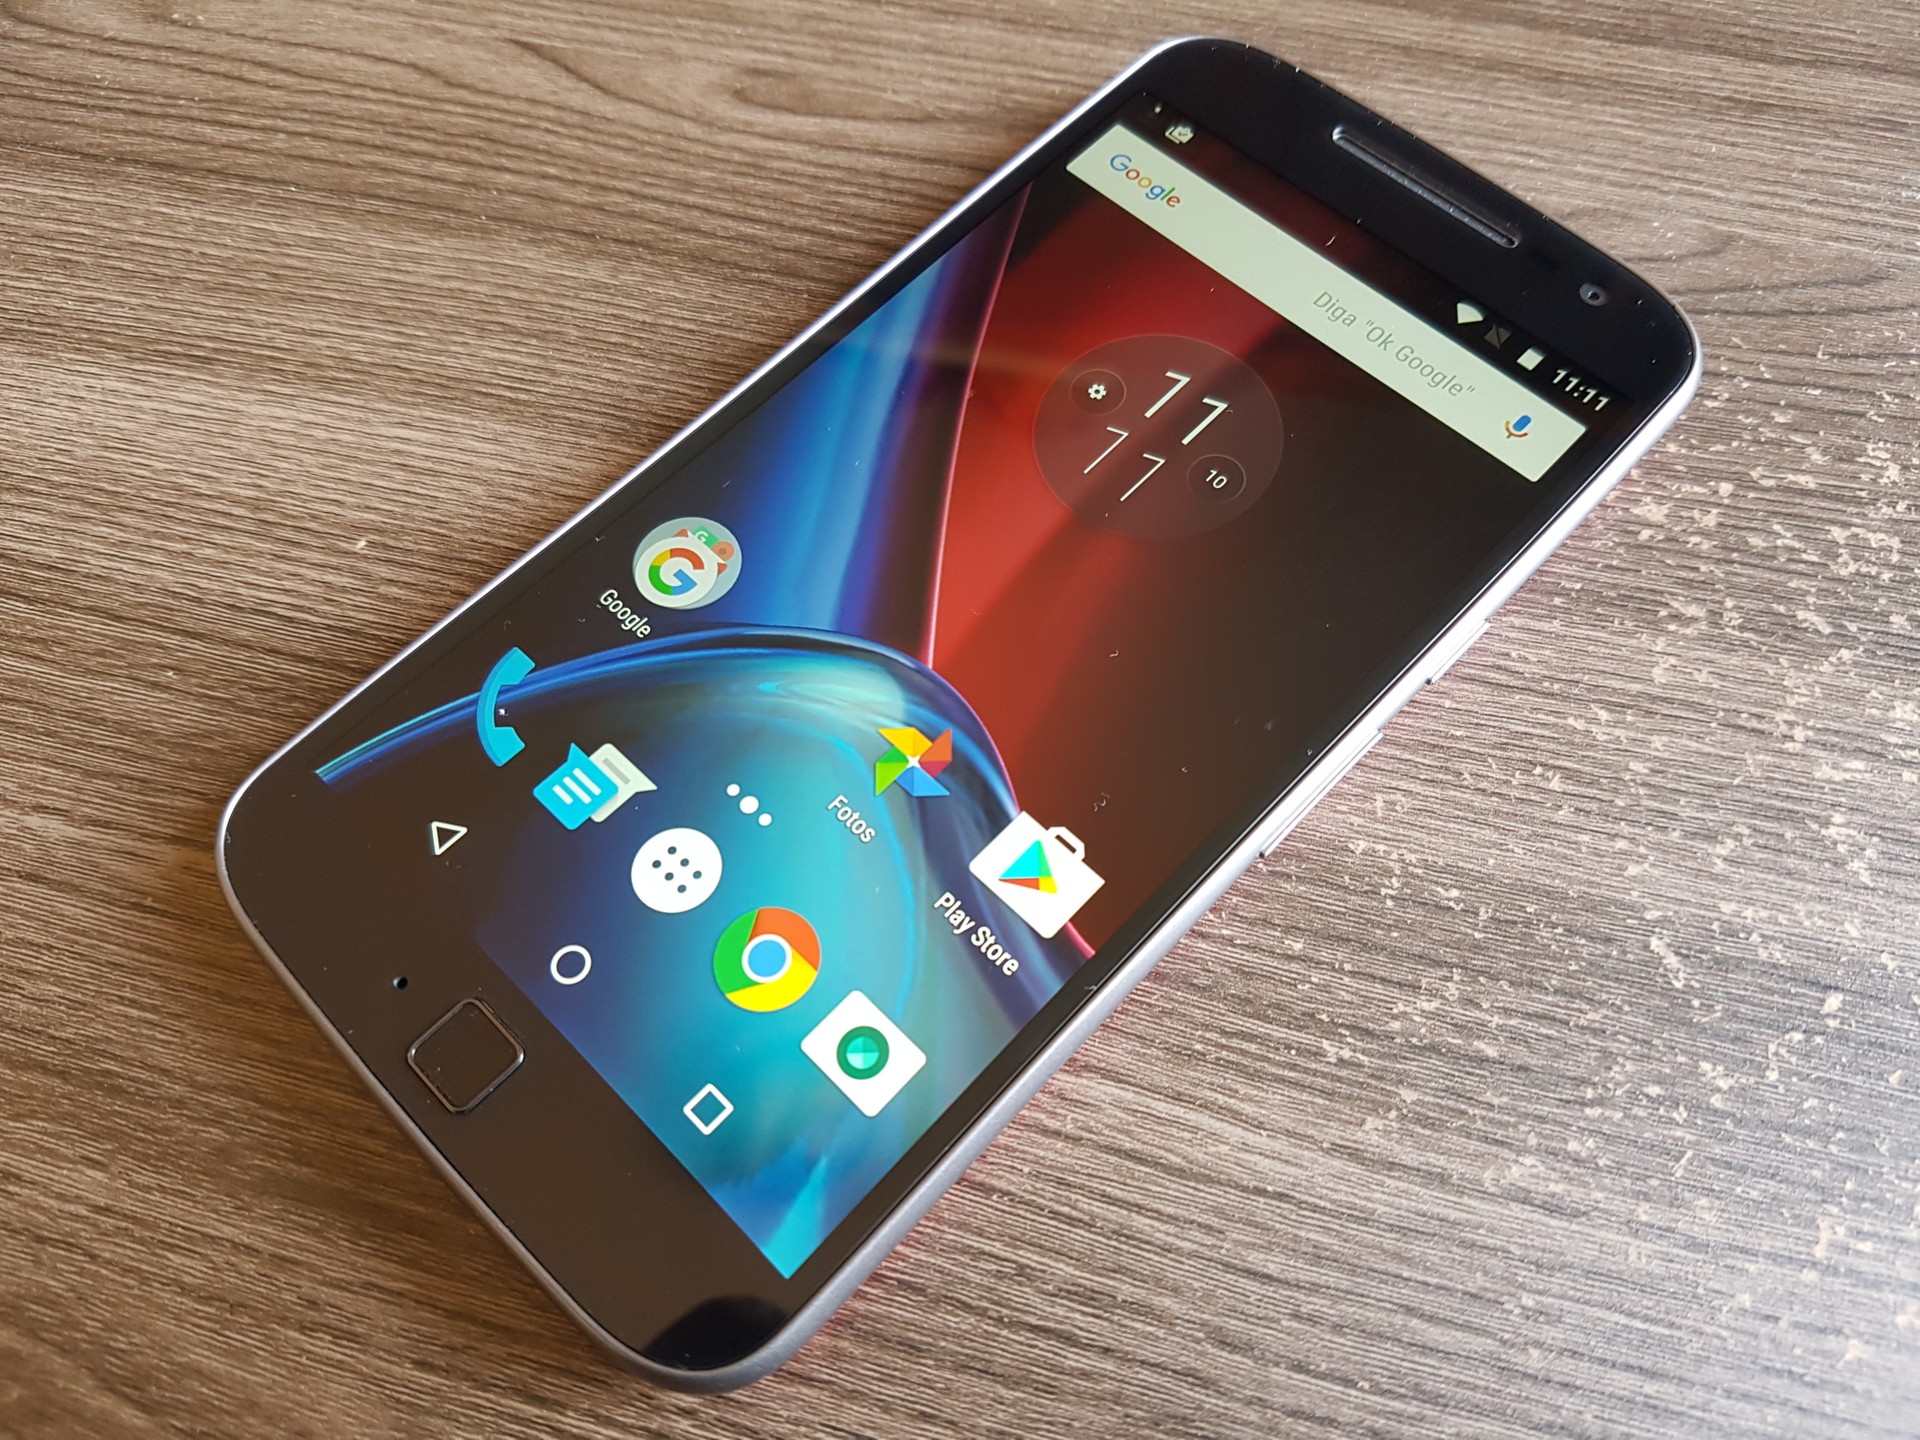 How to get Android 7.0 Nougat on Moto G4 Plus